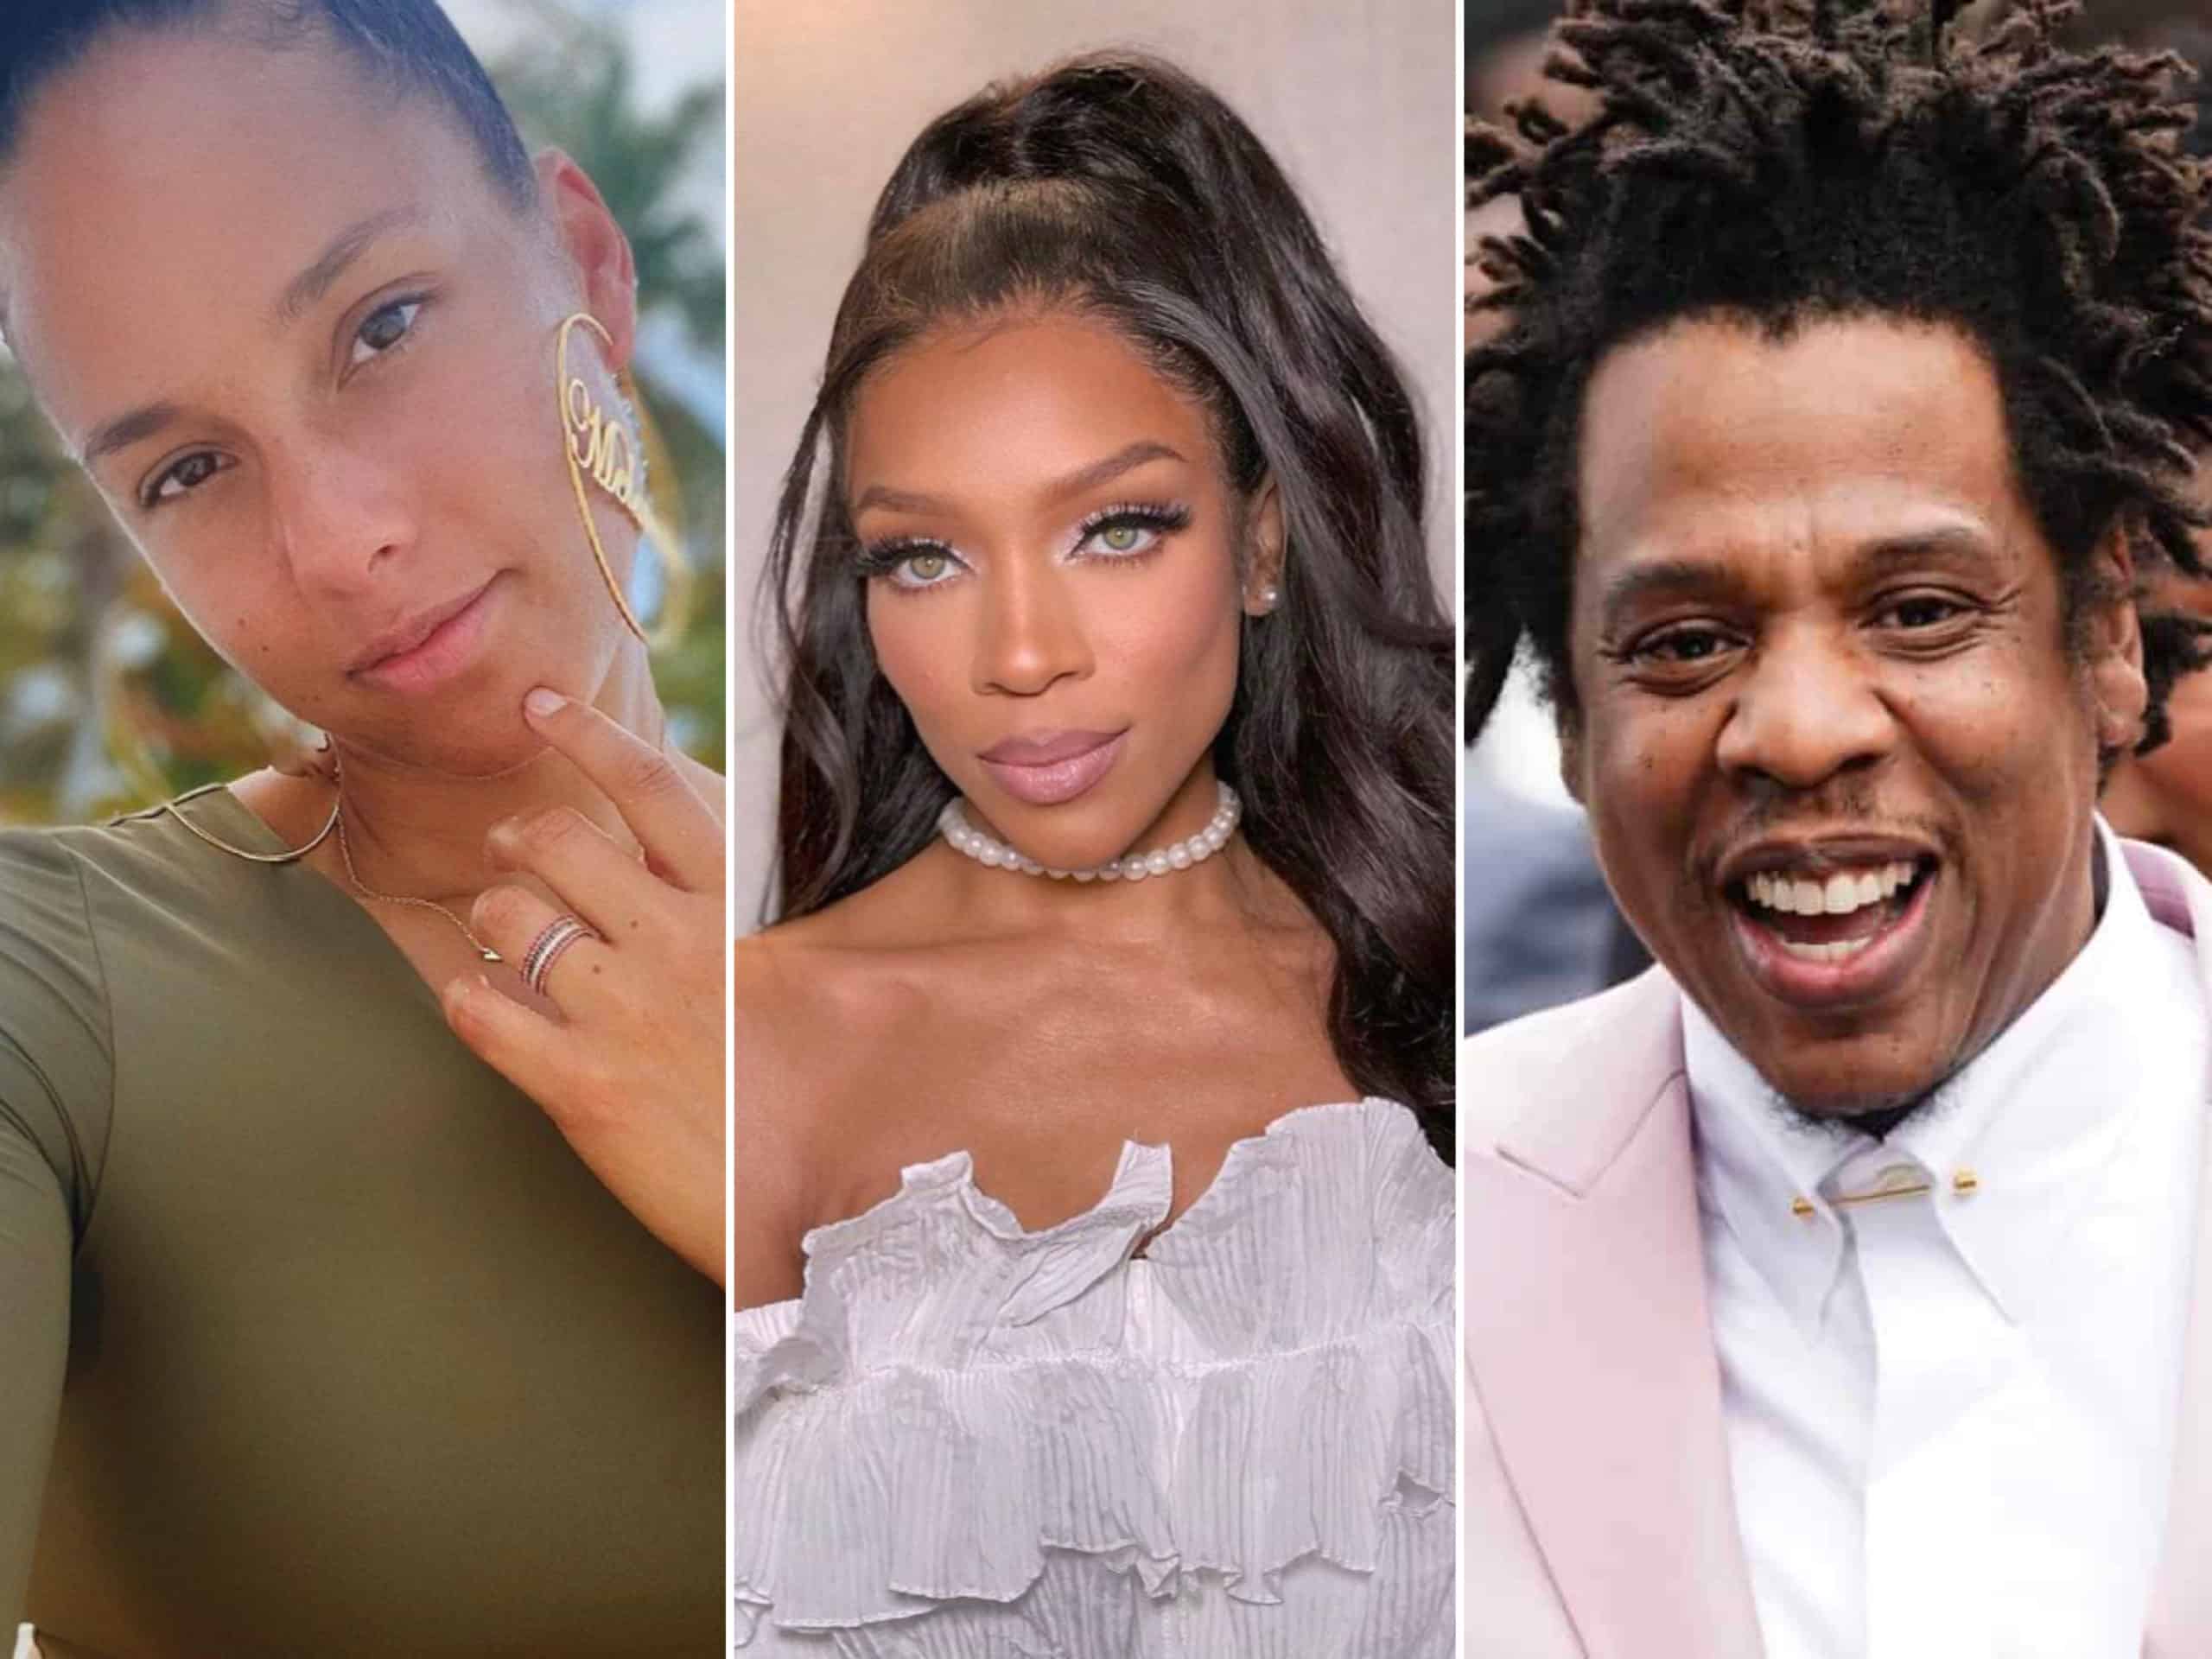 Lil Mama shared her appreciation for Alicia Keys and Jay-Z as they talked about their 2009 VMA performance where she joined them on stage and said they forgave her for the moment.